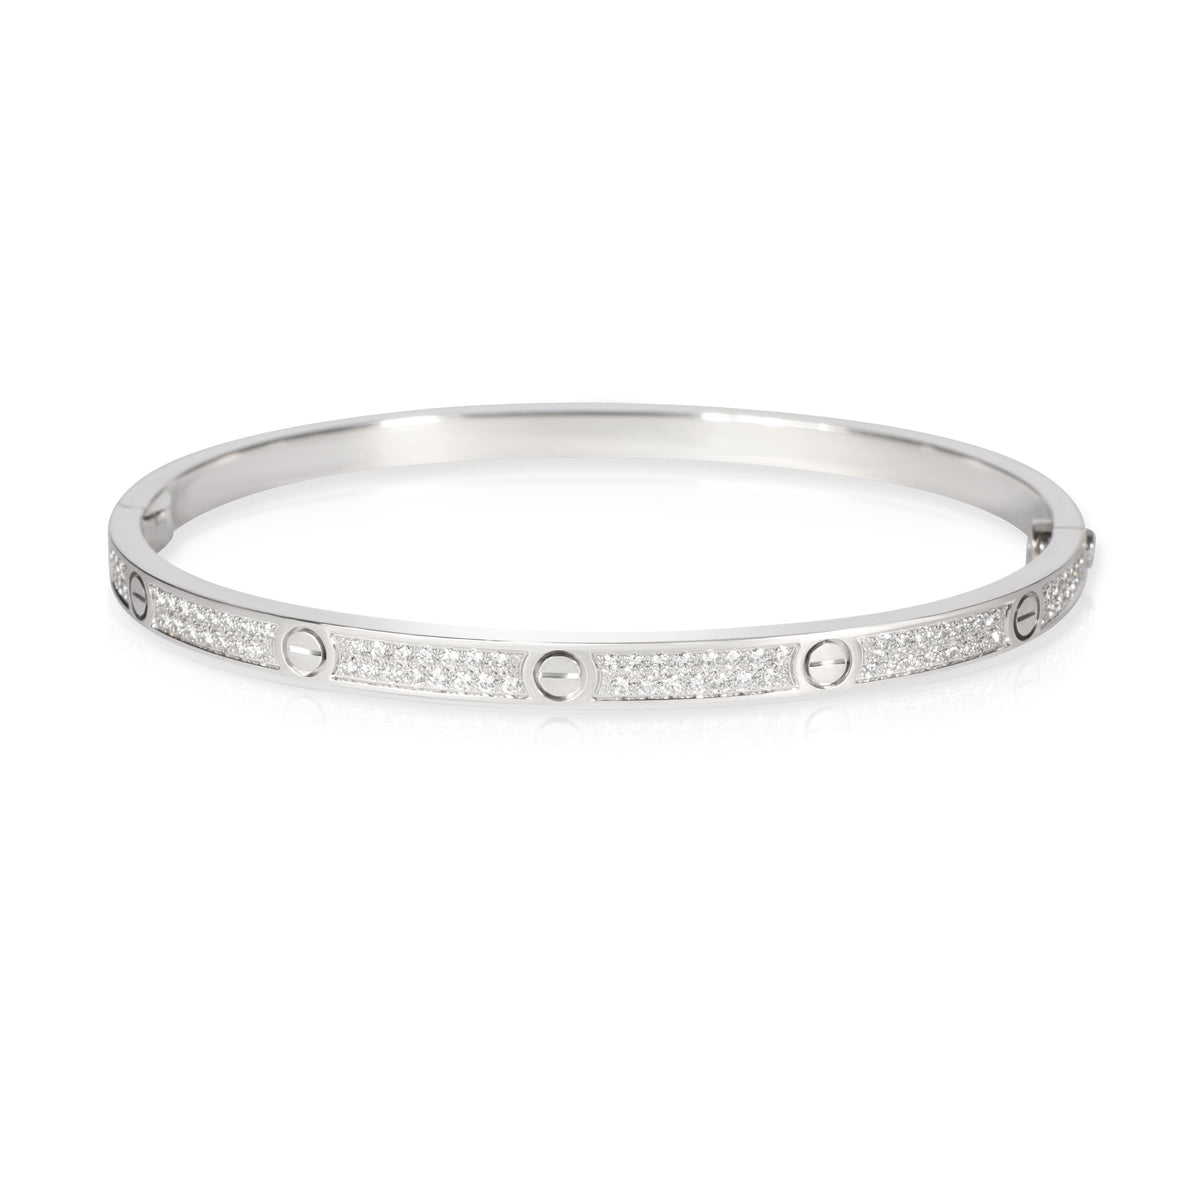 Cartier Love Bracelet Small Model with Pave Diamonds in 18K White Gold 0.95 CTW